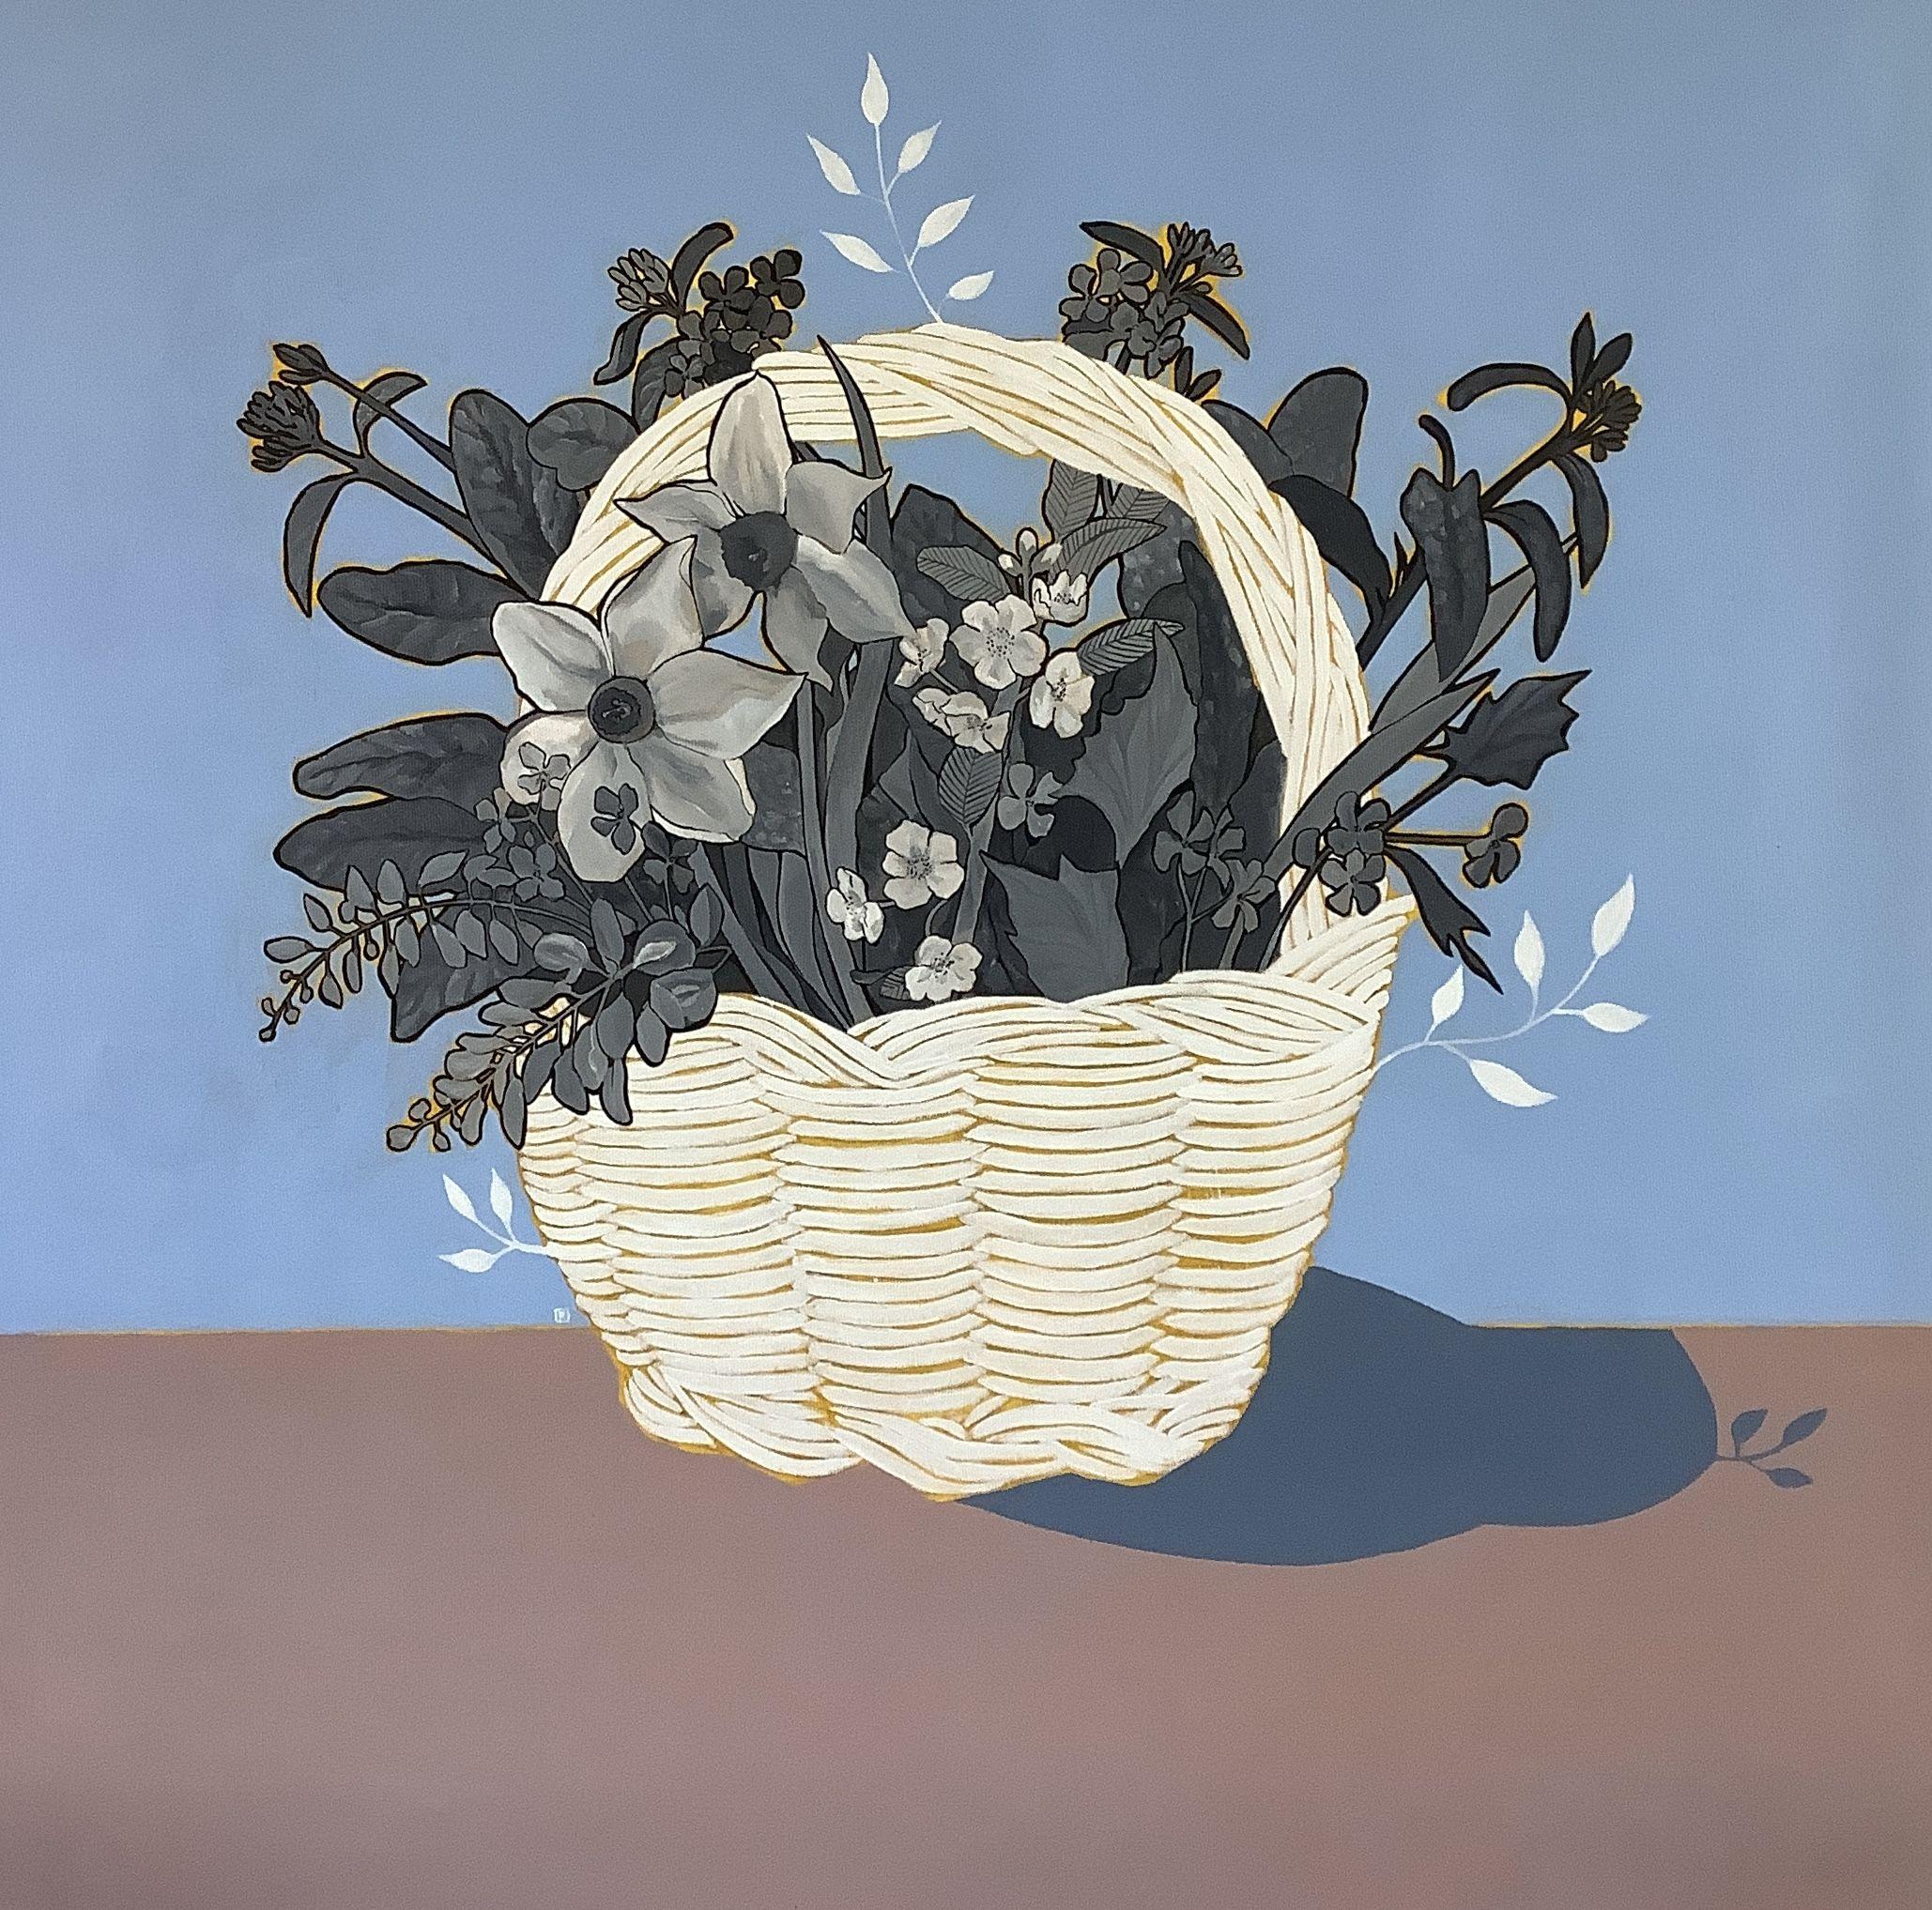 Artwork inspired from a basket of flowers that the artist picked in her garden during a Spring day. The composition of flowers and herbs became an artistic gesture and has been immortalised in this artwork. Part of a series of 4 still life with the